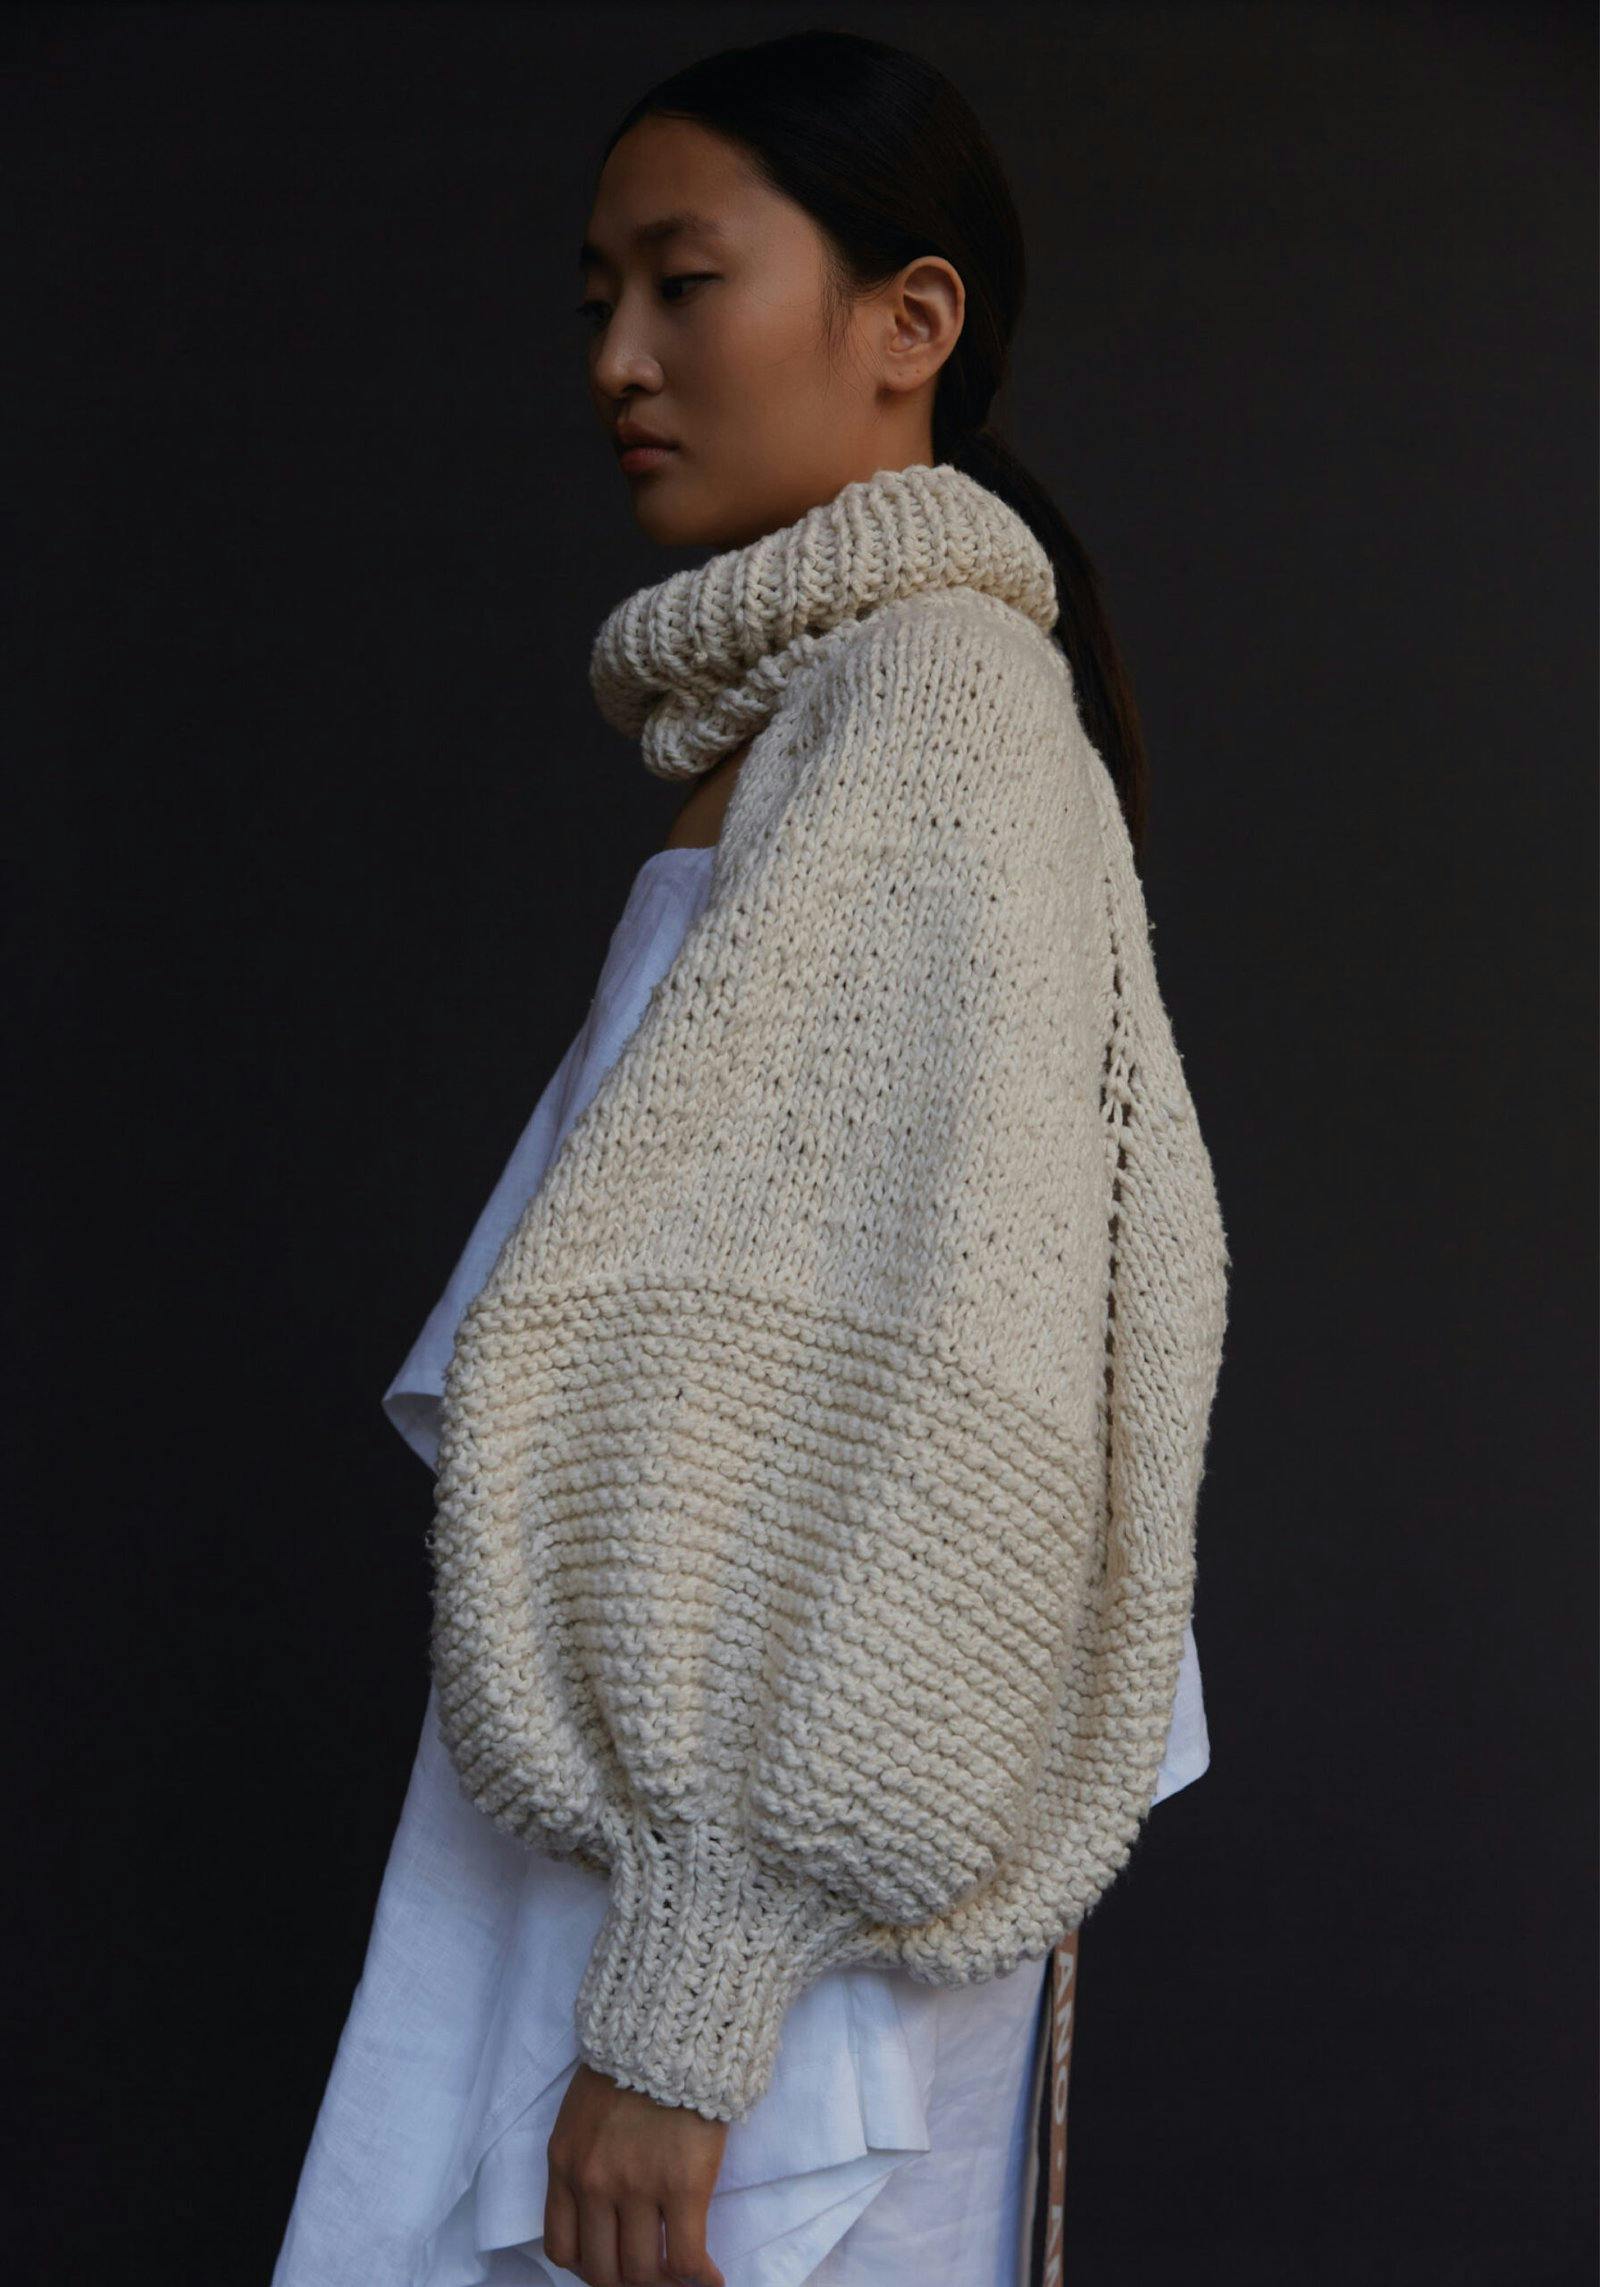 Ivory Sleeves: Item 009 Ivory, a product by Studio cumbre